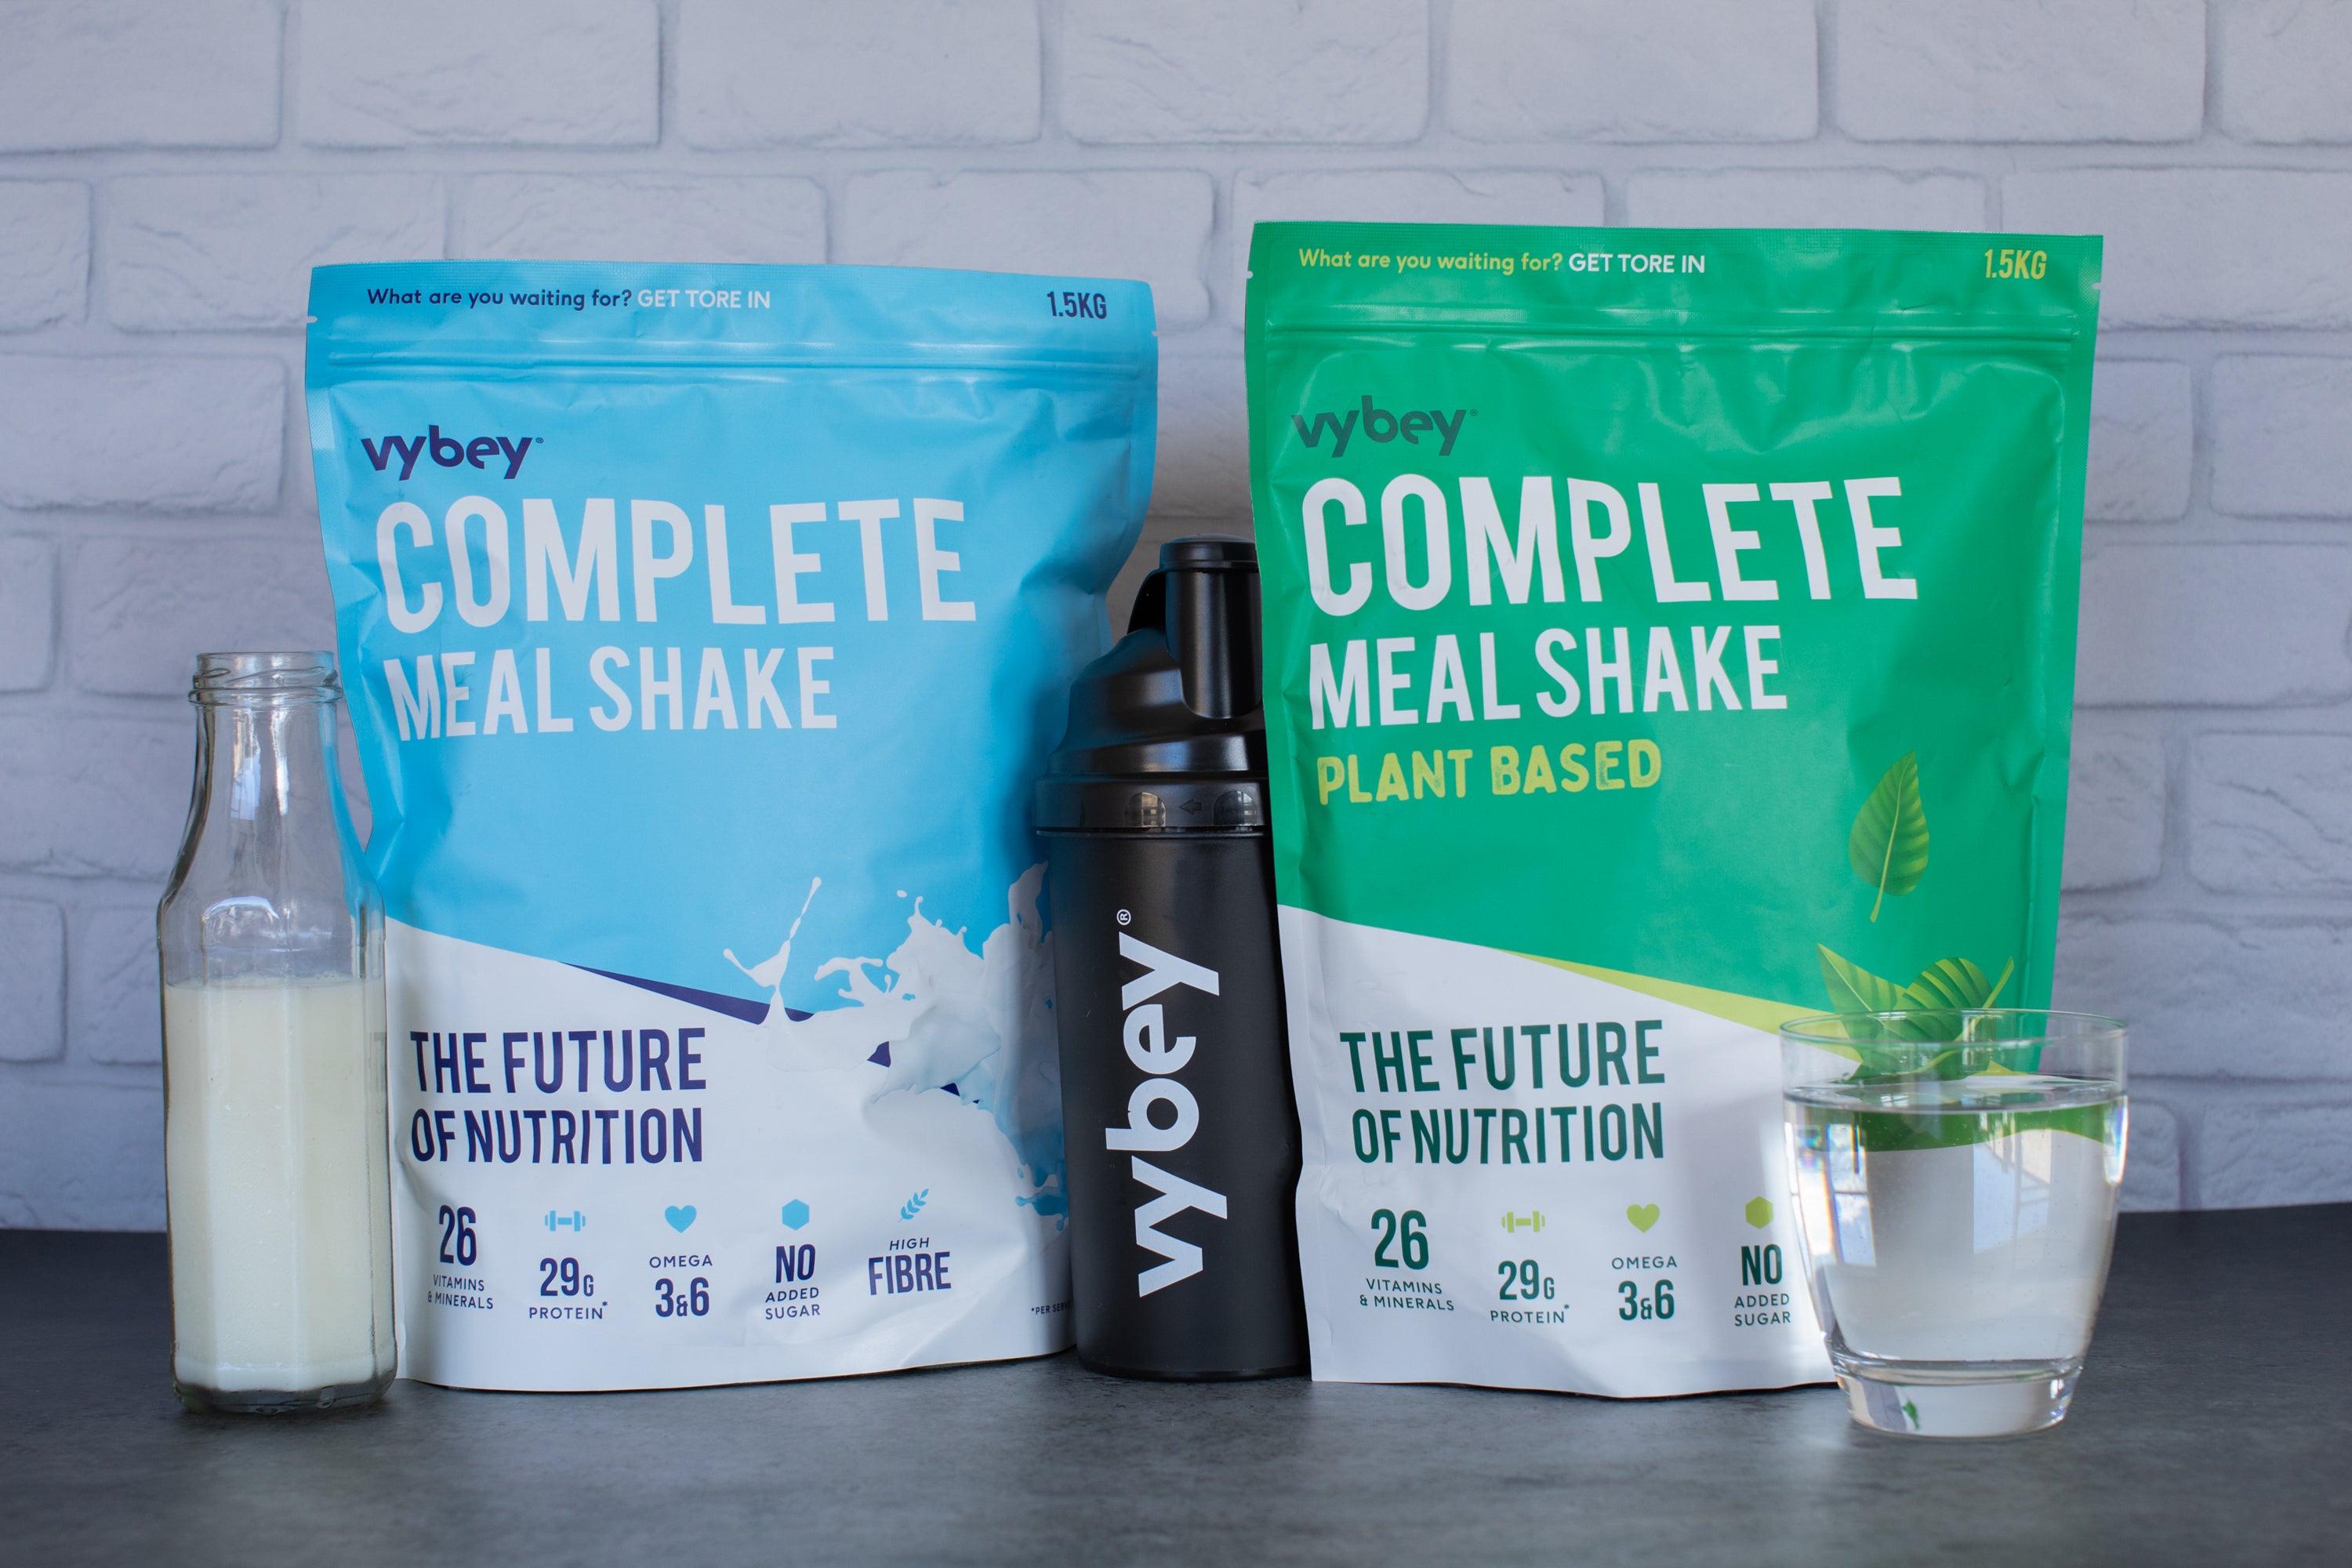 picture of vybey meal replacement australia vanilla and chcolate flavour with some milk bottle & glass of water